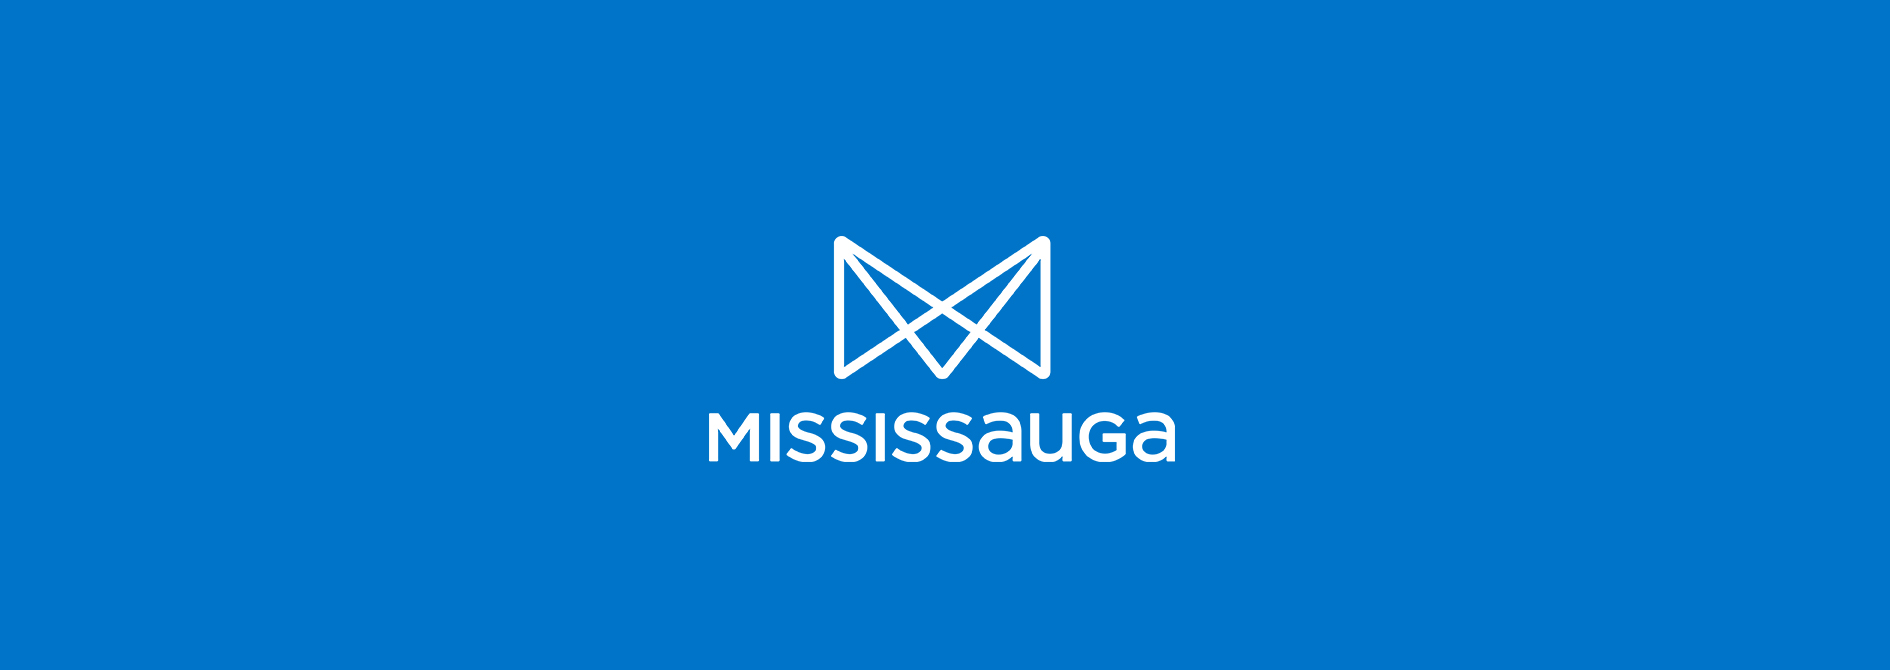 You are currently viewing Building Skilled Talent Together: Addressing the Technical Skills Gap for Mississauga’s Advanced Manufacturing Sector